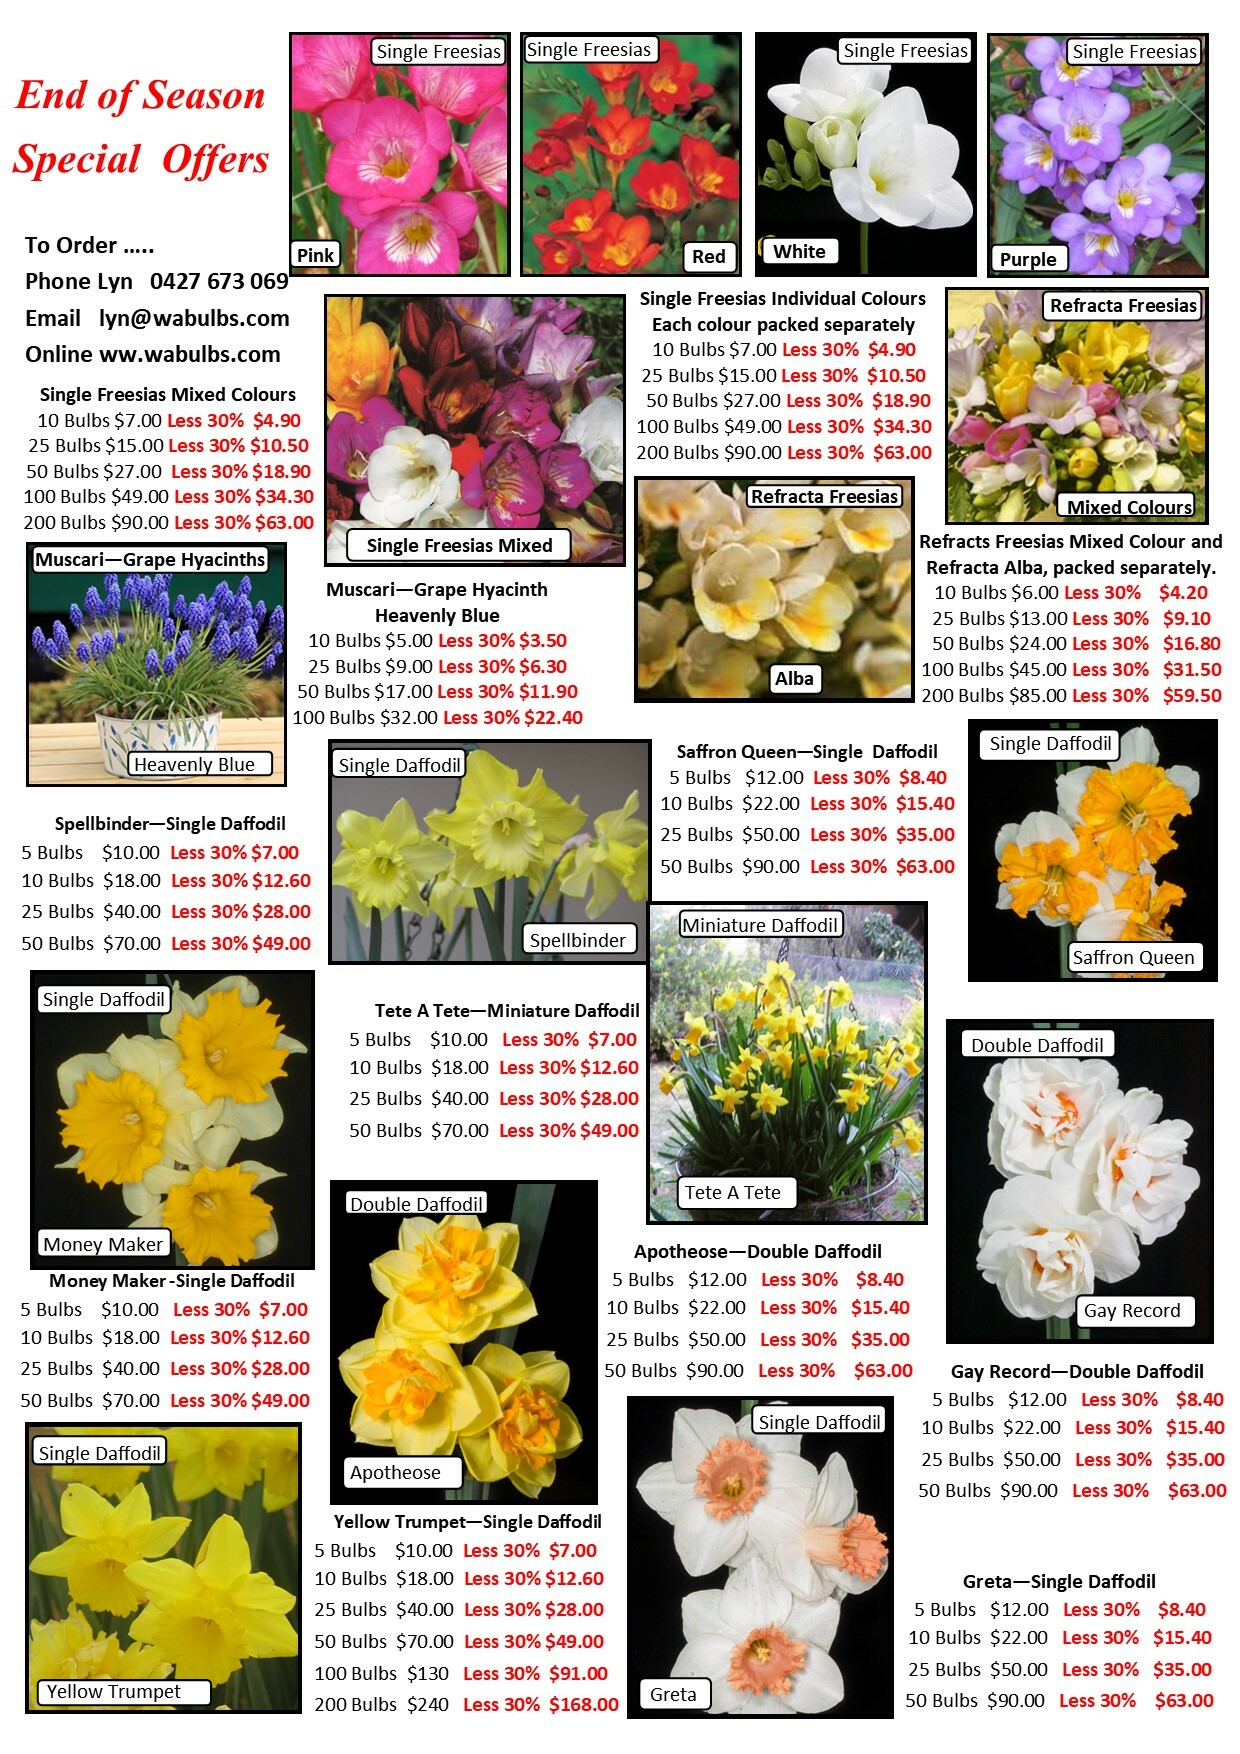 last-chance-for-spring-flowering-bulbs-page-3.jpg